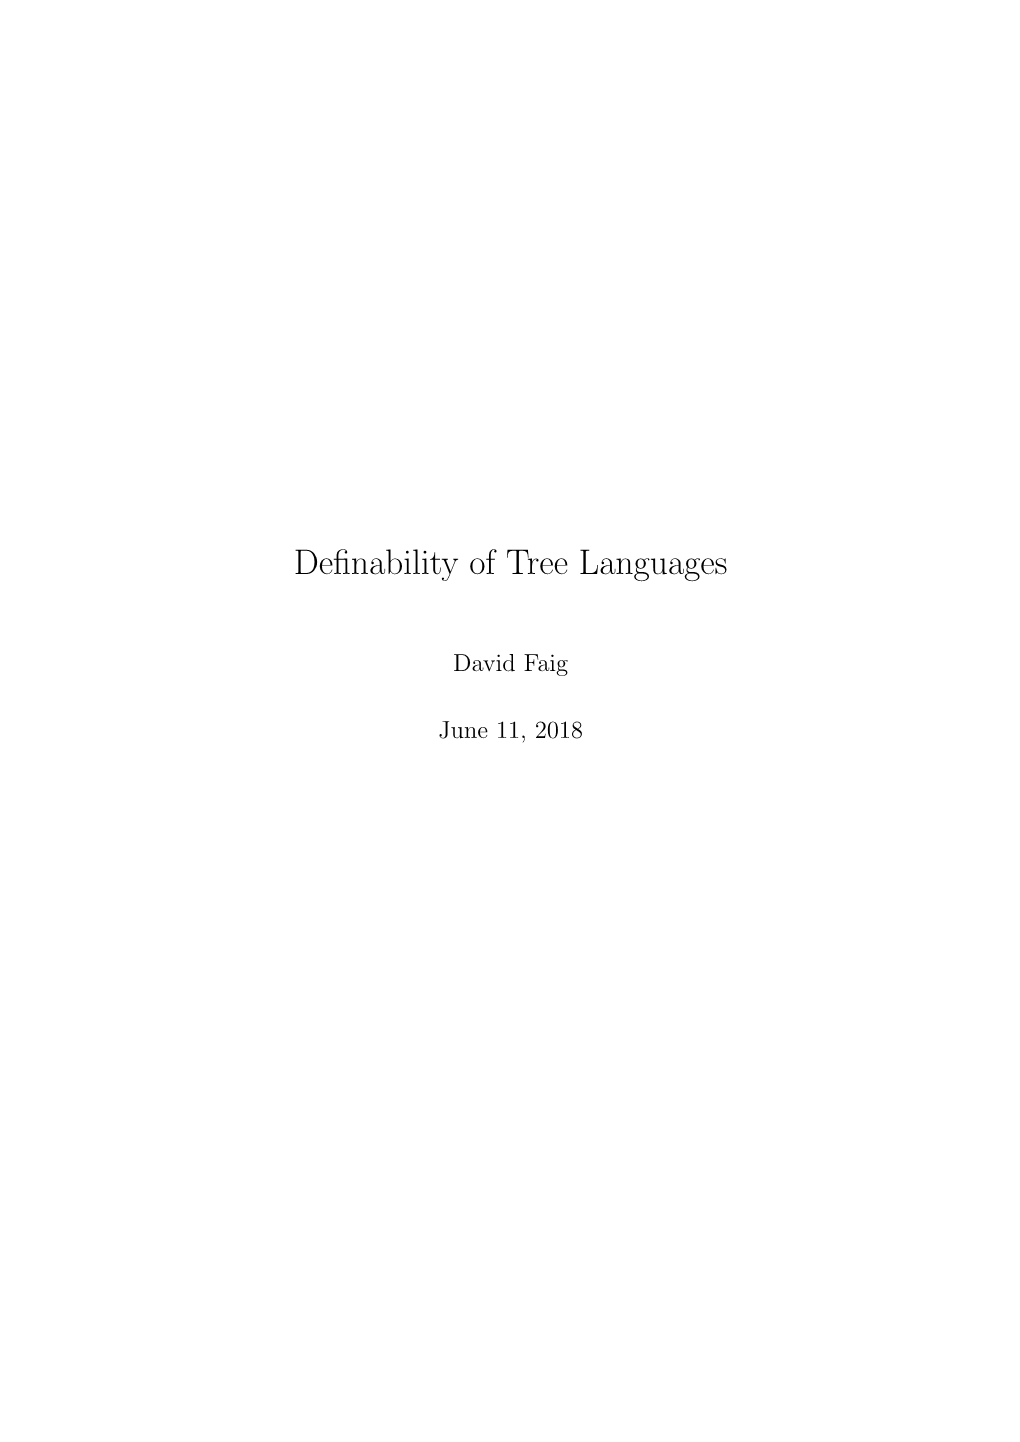 Definability of Tree Languages